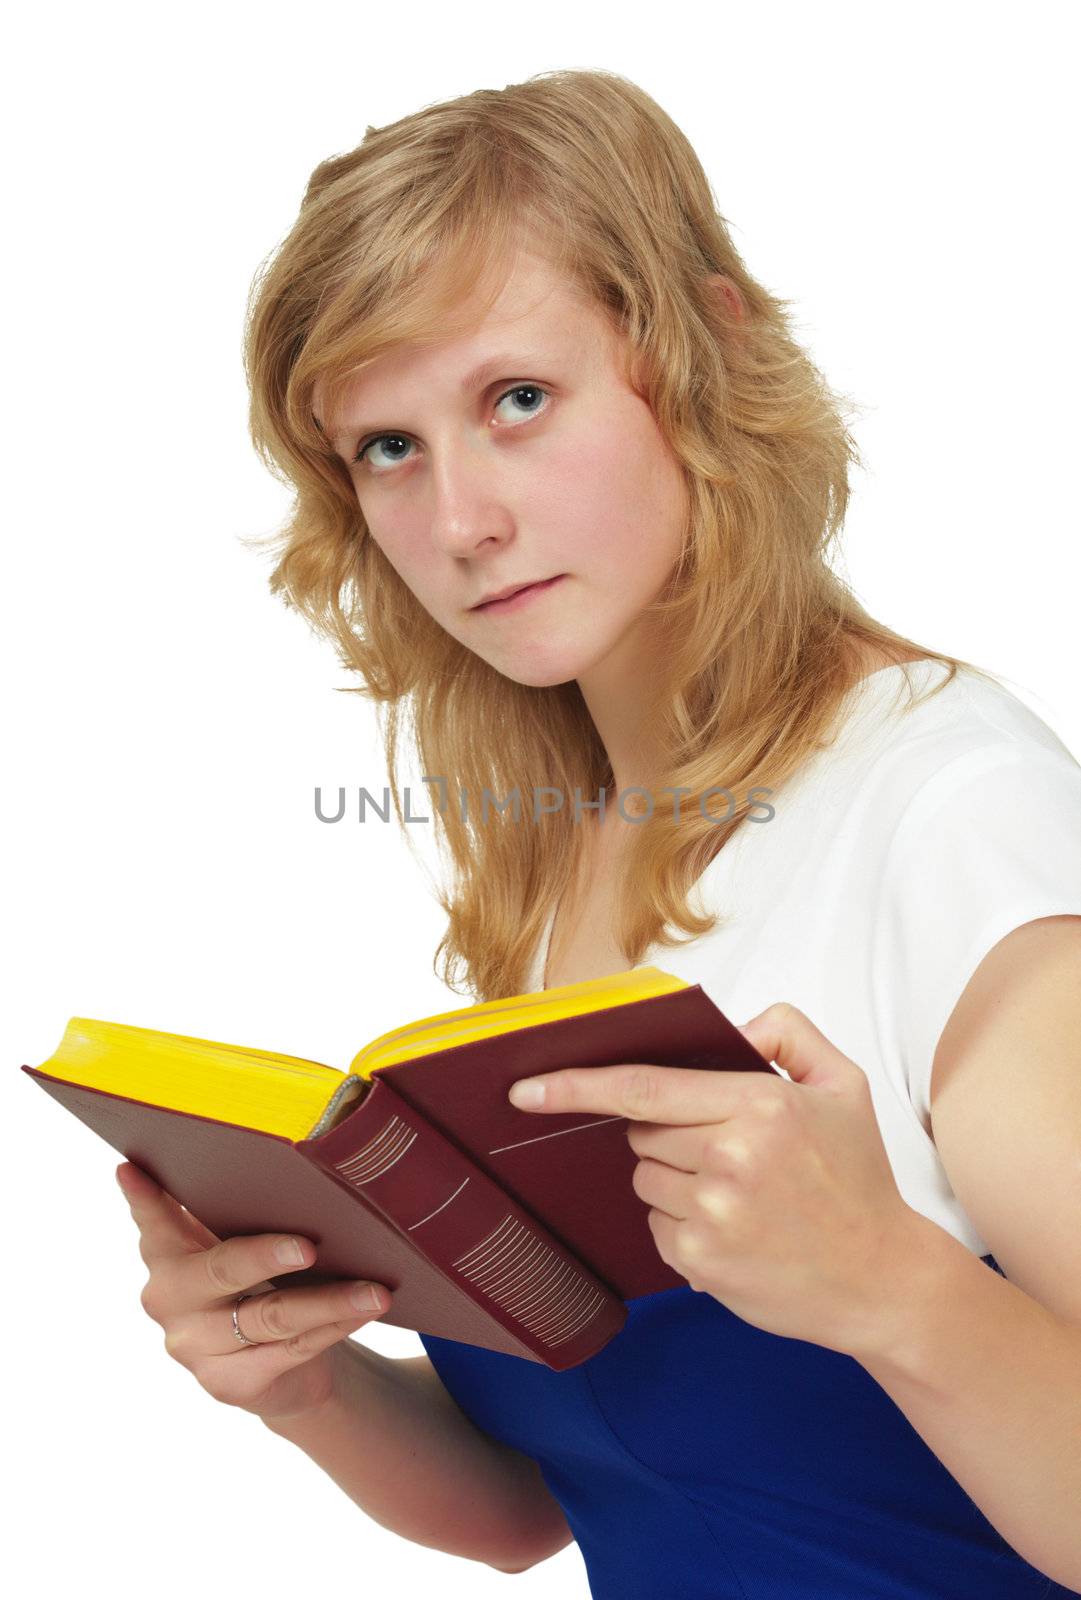 The girl - a student reading a textbook isolated on white background